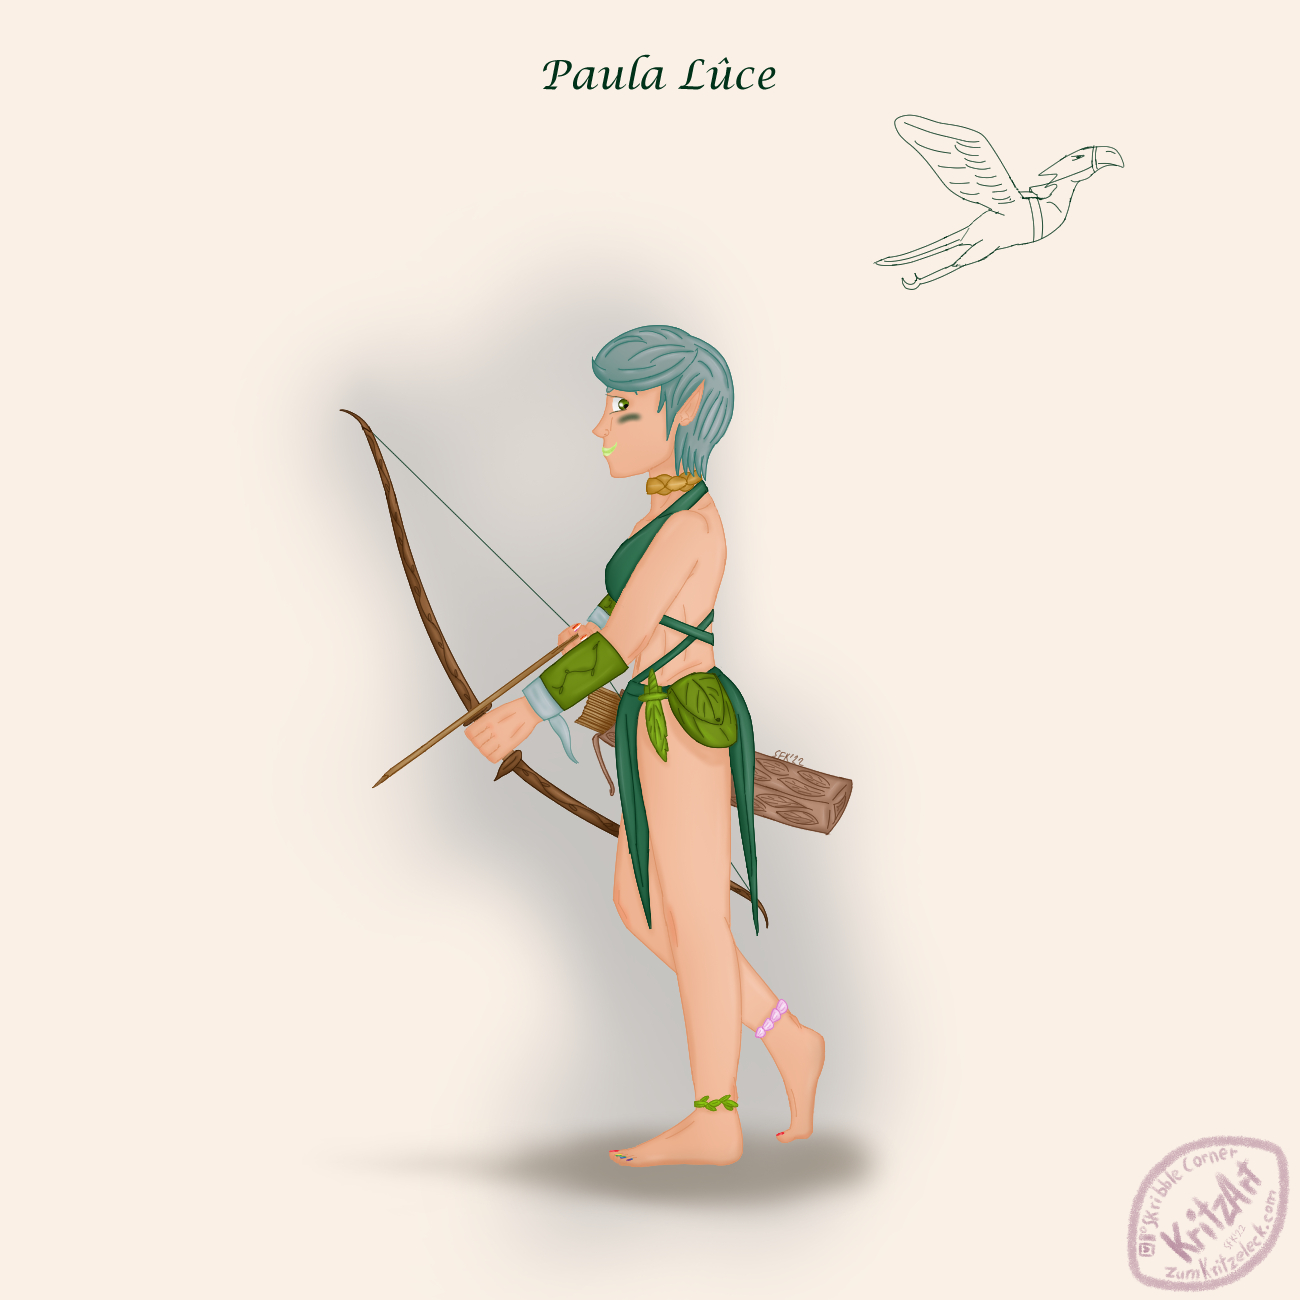 Digital Painting, comic style, simple beige background, light shadows: Paula in fantasy version; young woman, short turqoise hair; toe nails painted in rainbow colour, finger nails in lesbian Pride flag colour; she's wearing some kind of green leaf-like loincloth that only covers breasts, lap and butt, green braces, a knive in a sheath of leaf optic, a bag also in leaf optic, turqoise wrist bands, a green leaf band at her right ankle, a pink shell band at her left one and a golden neck band; she is holding a wooden bow and arrow; in the background the outline of a flying big bird with a strong beak; text: "Paula Lûce".